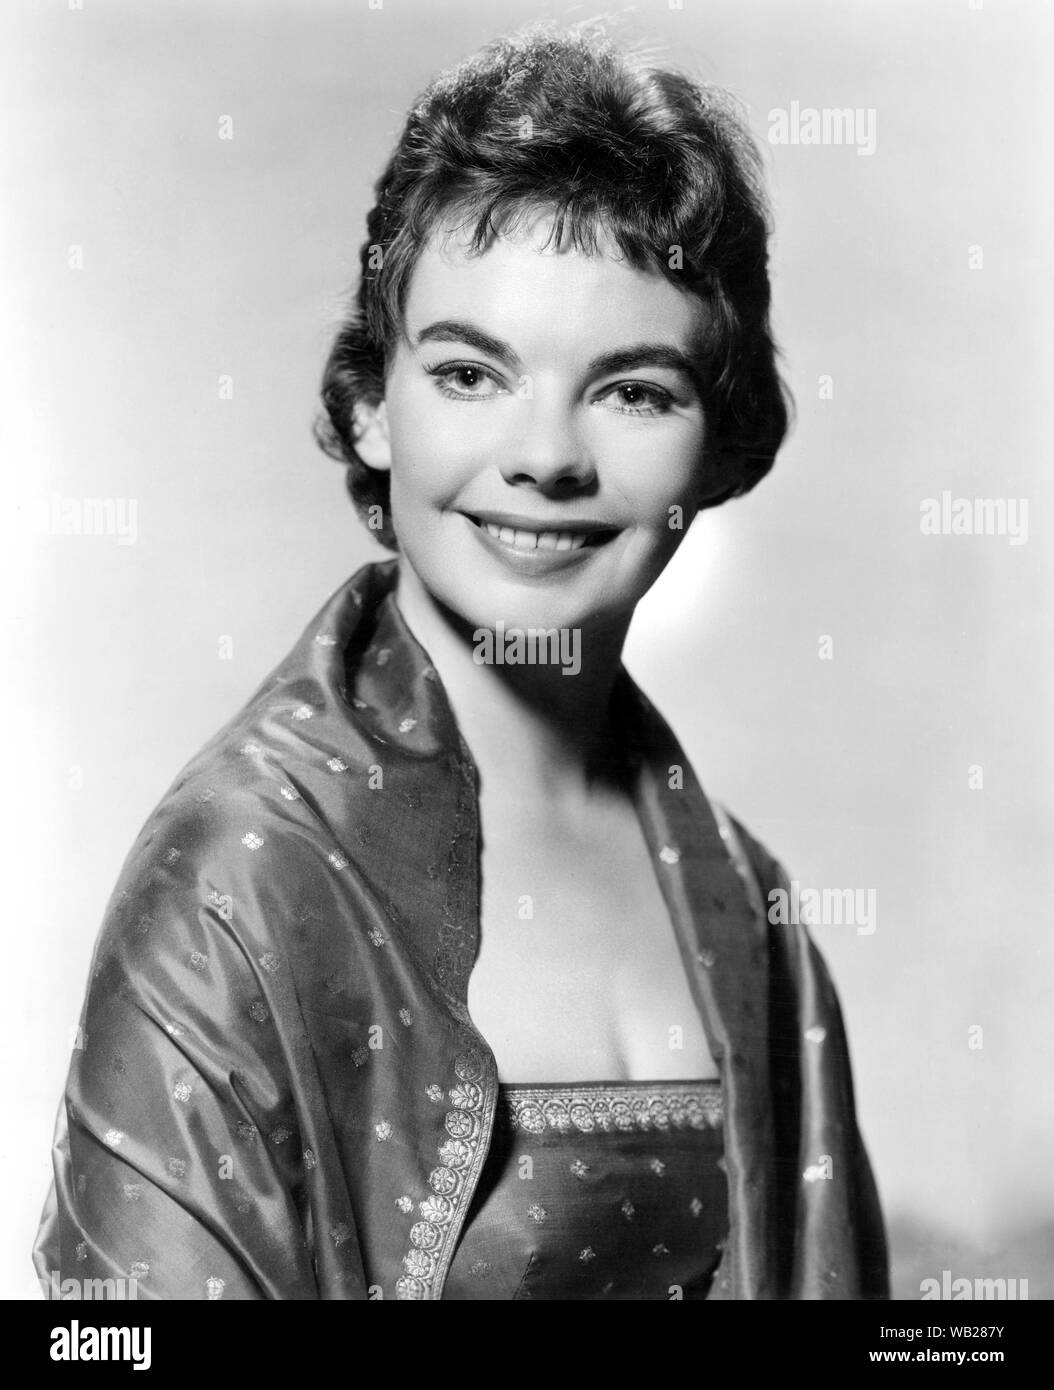 Actress Joan Elan, Publicity Portrait for the Film, 'Darby's Rangers',  Warner Bros., 1958 Stock Photo